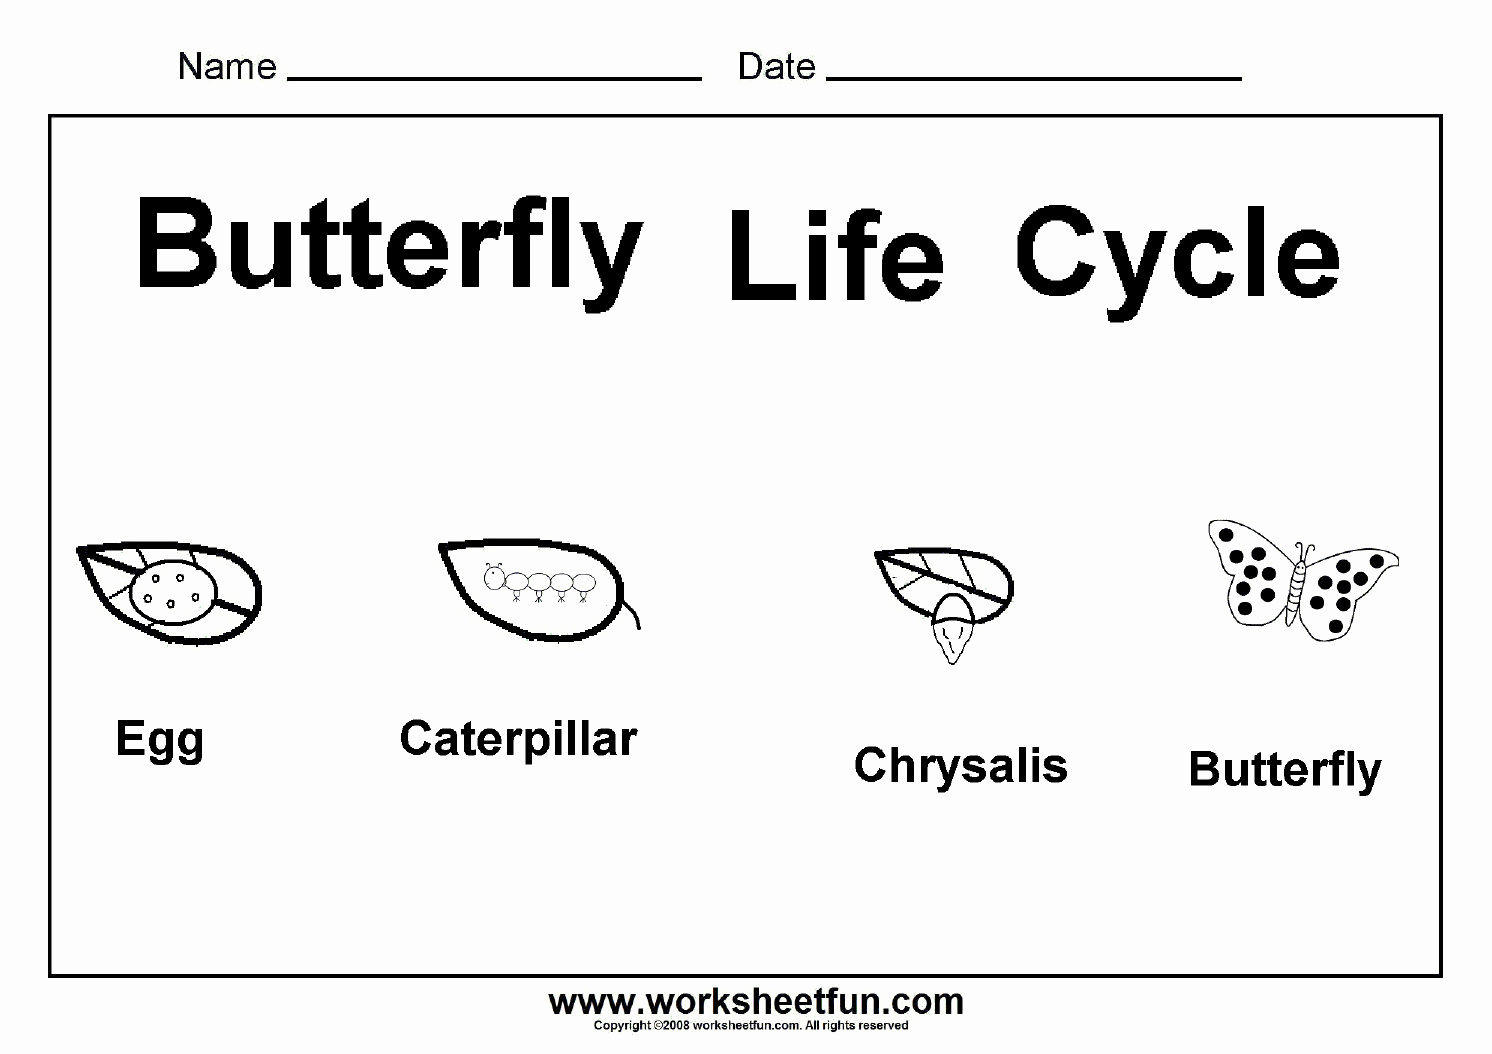 Butterfly Life Cycle Worksheet Unique butterfly Life Cycle – E Worksheet Free Printable